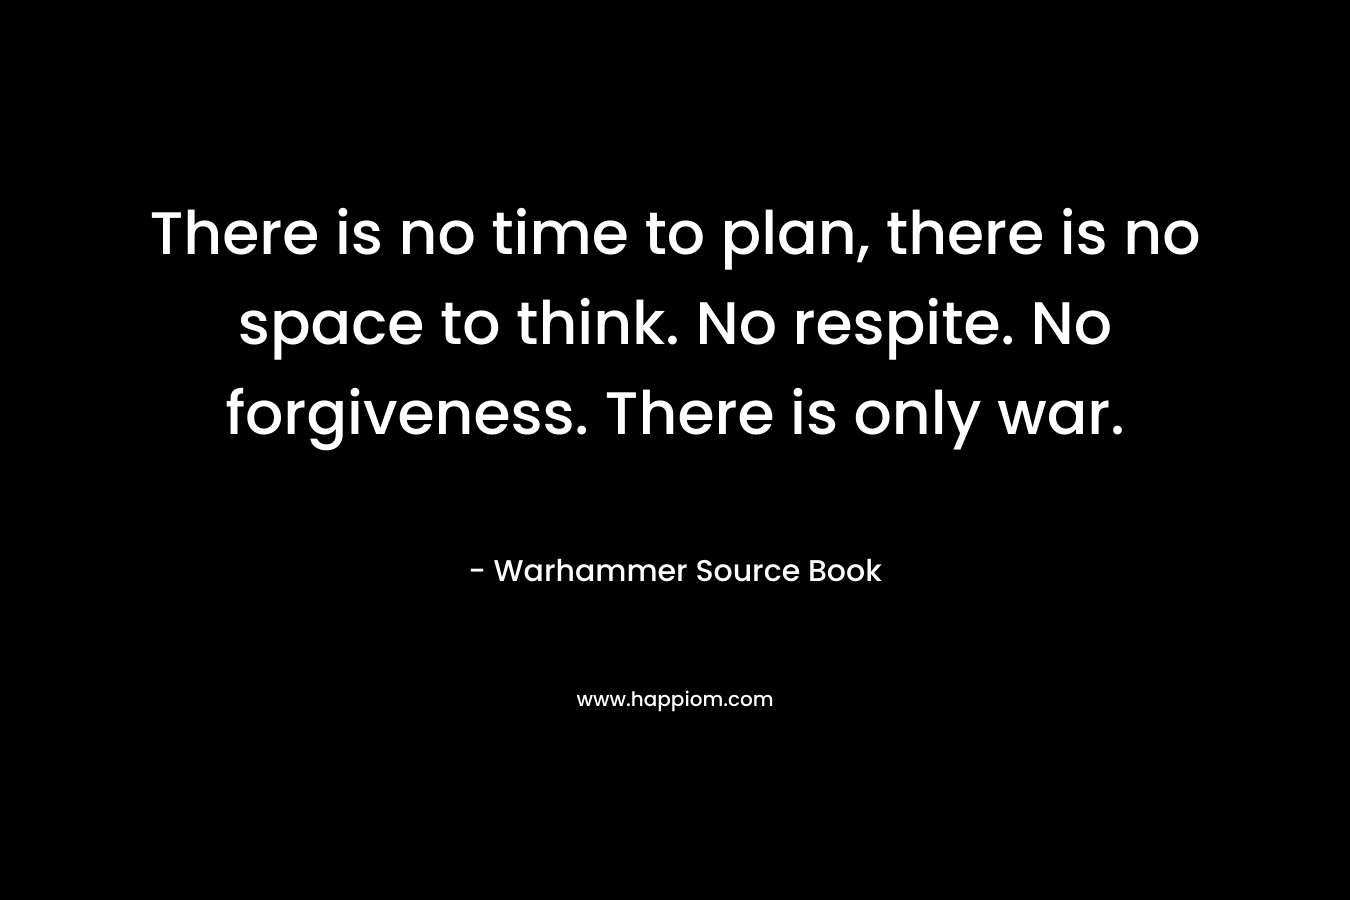 There is no time to plan, there is no space to think. No respite. No forgiveness. There is only war.